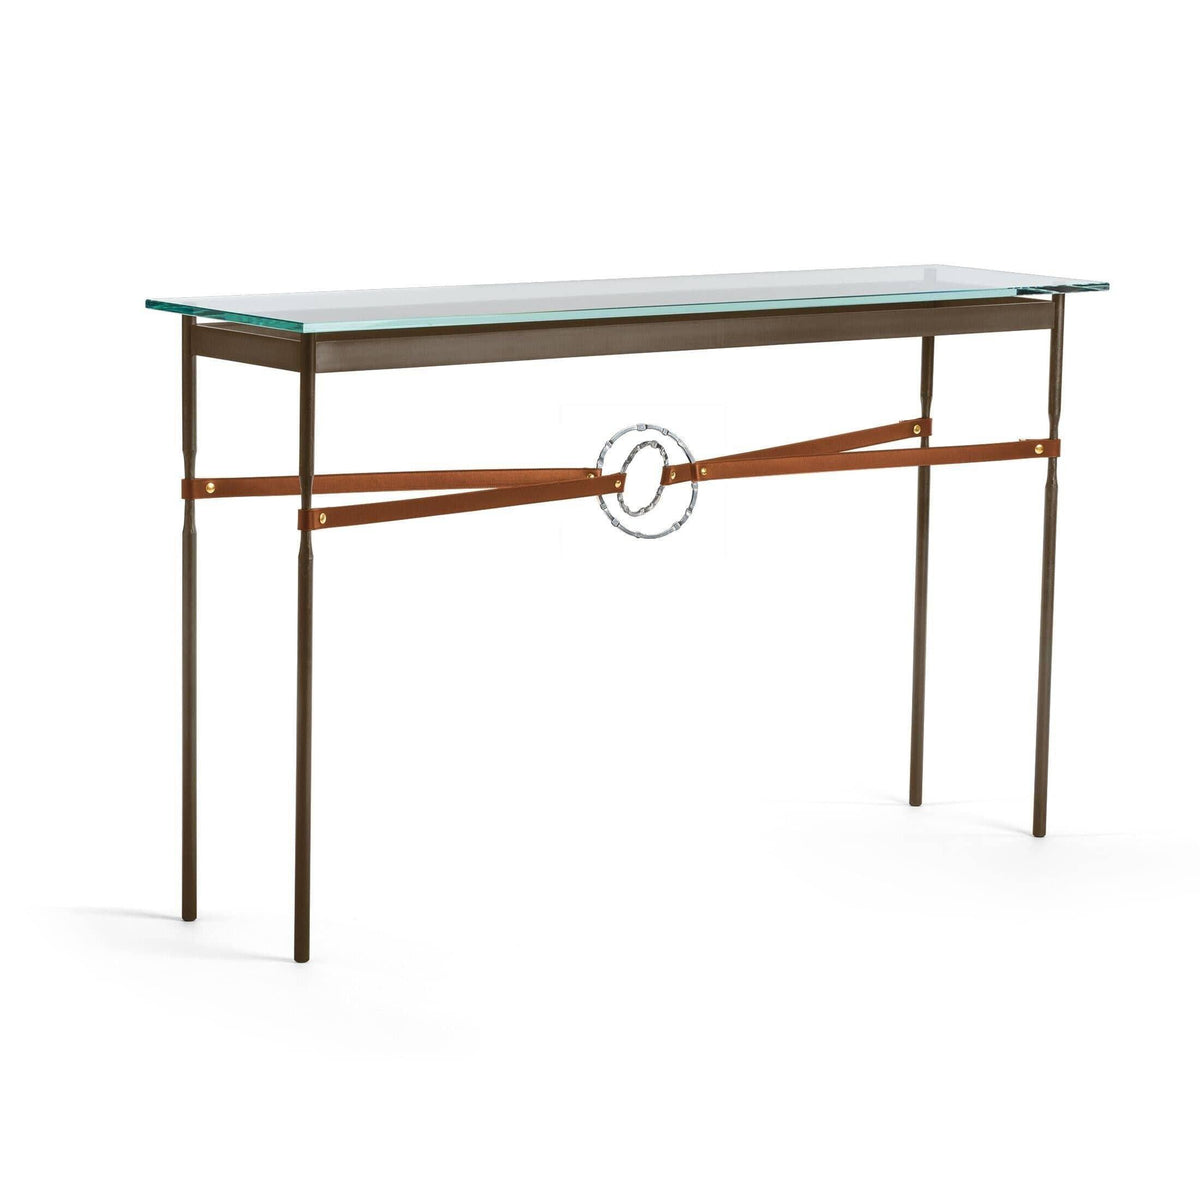 Hubbardton Forge - Equus Chestnut Leather Console Table - 750118-05-85-LC-VA0714 | Montreal Lighting & Hardware